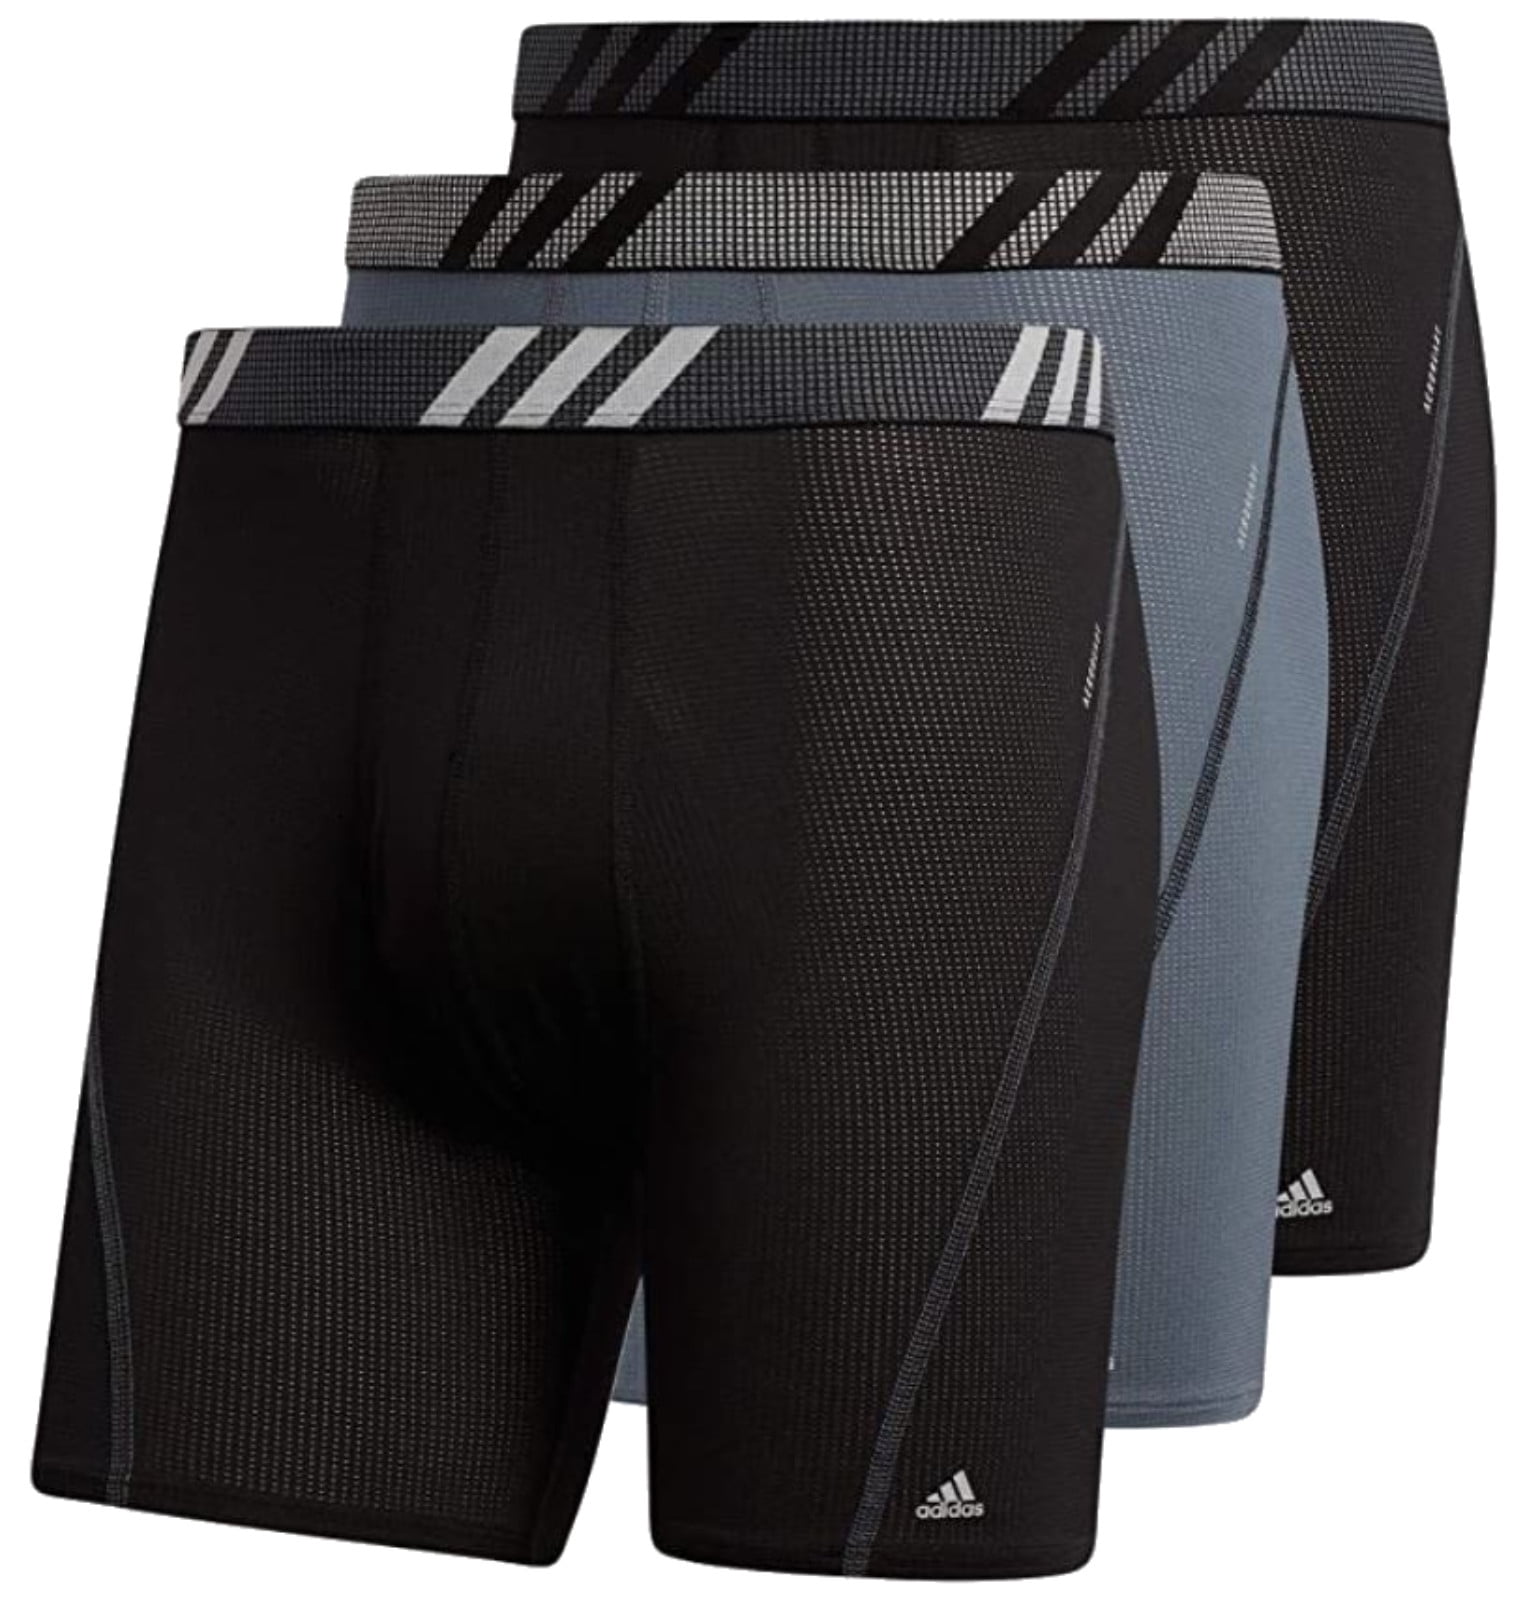 adidas Men's Performance Trunk Underwear 3-Pack Boxed